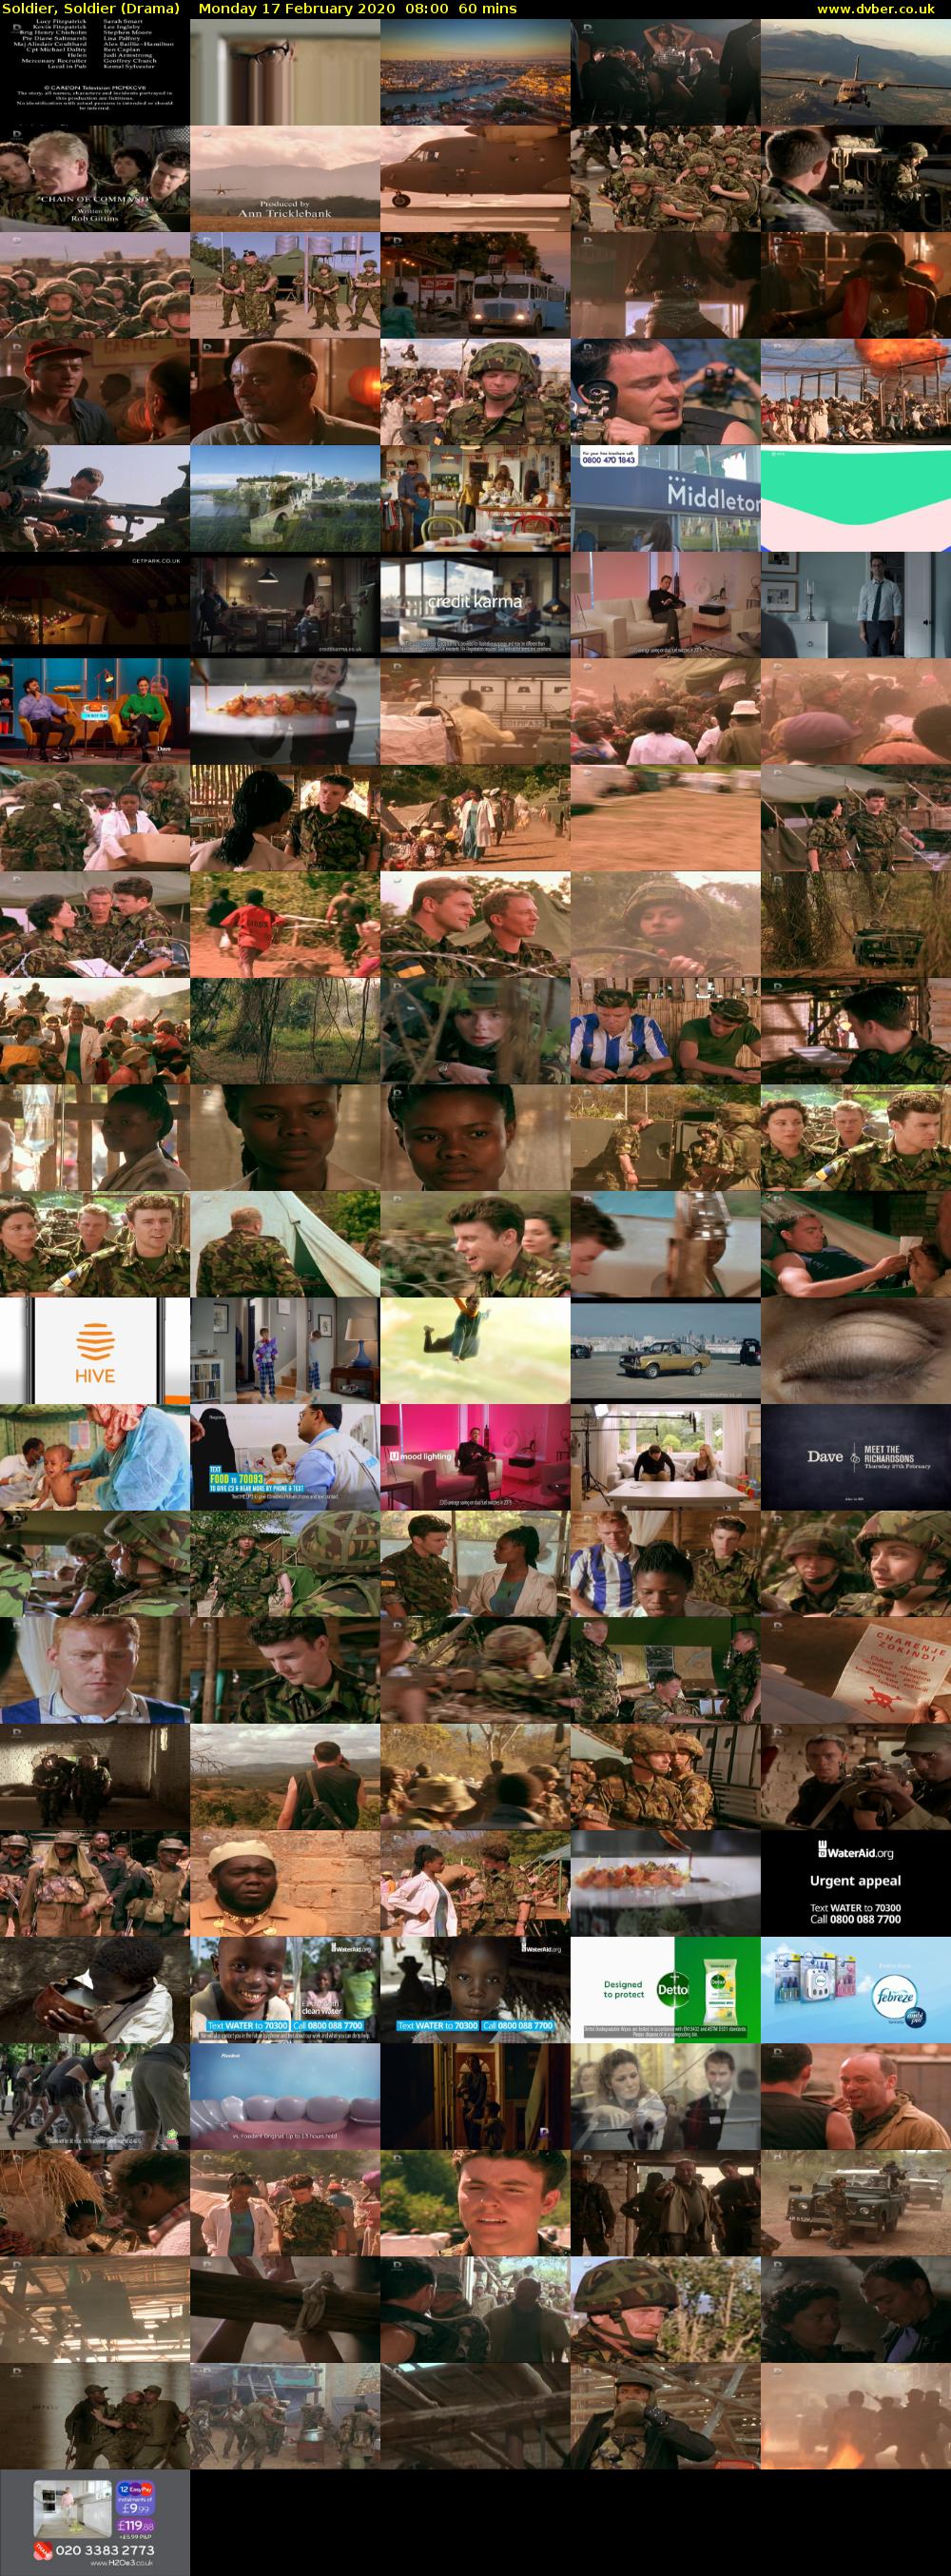 Soldier, Soldier (Drama) Monday 17 February 2020 08:00 - 09:00